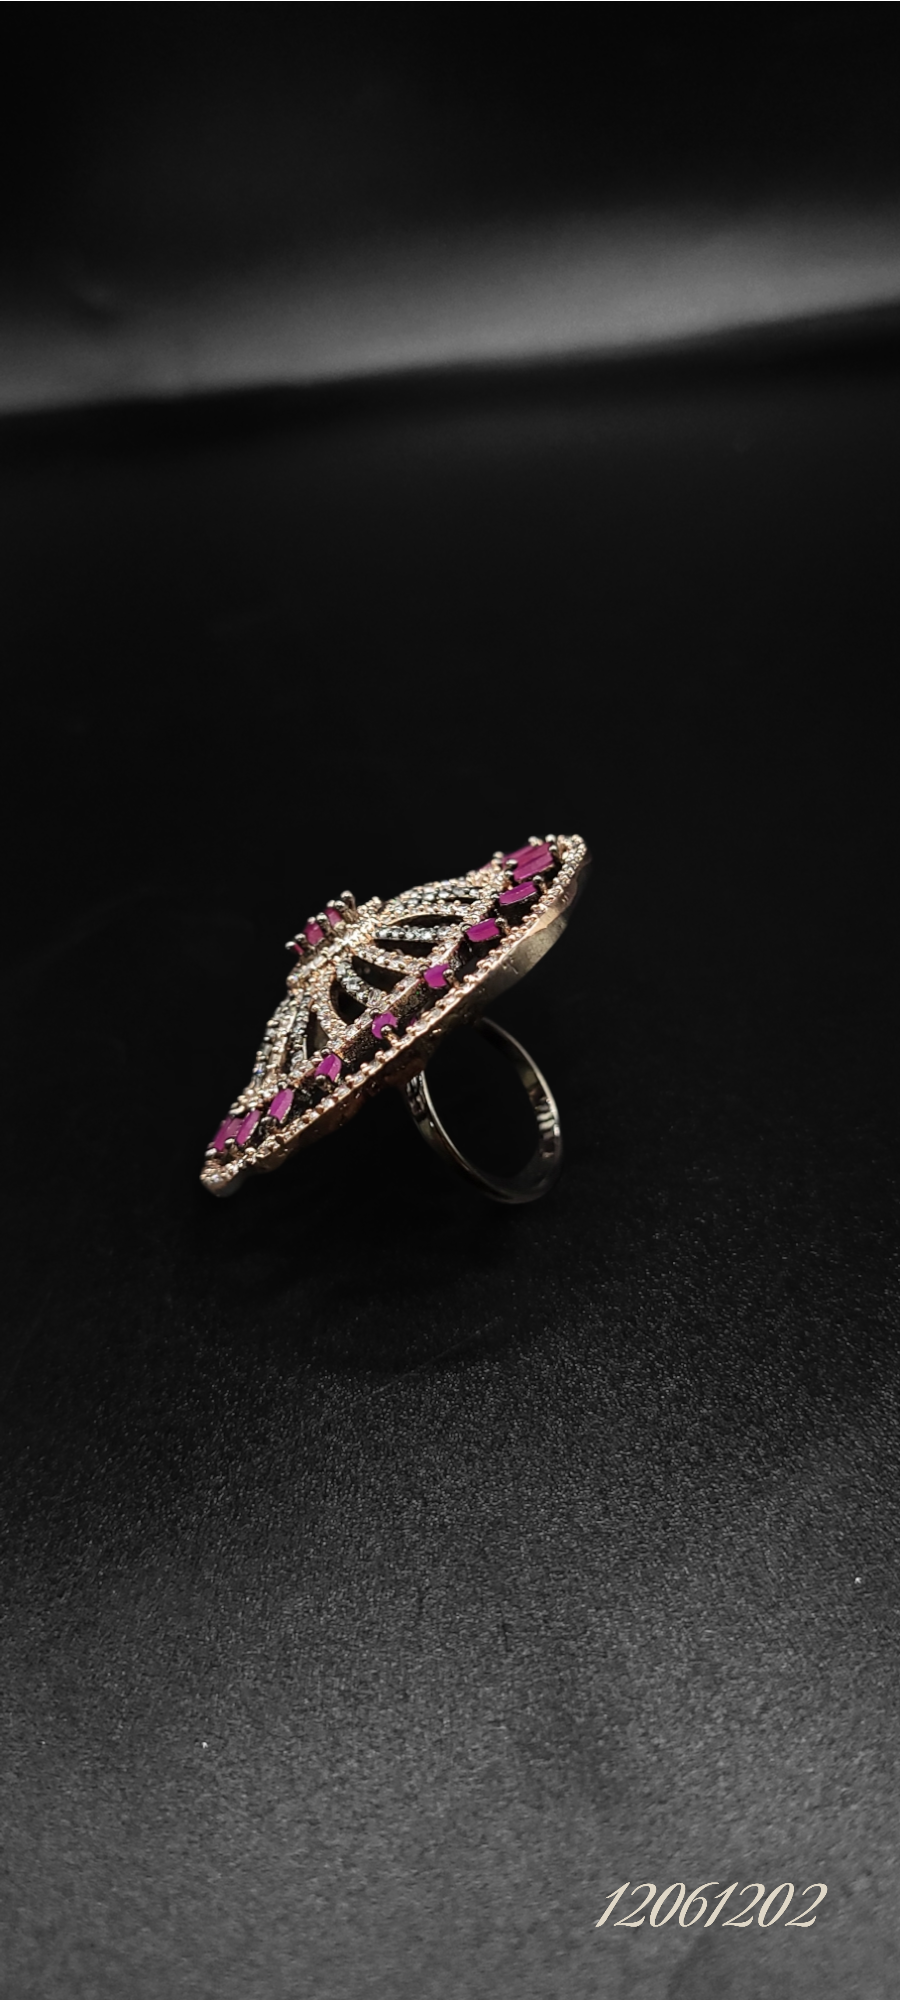 FLAWLESS DESIGNER DIAMOND RING IN ROSE GOLD AND PINK COLOR